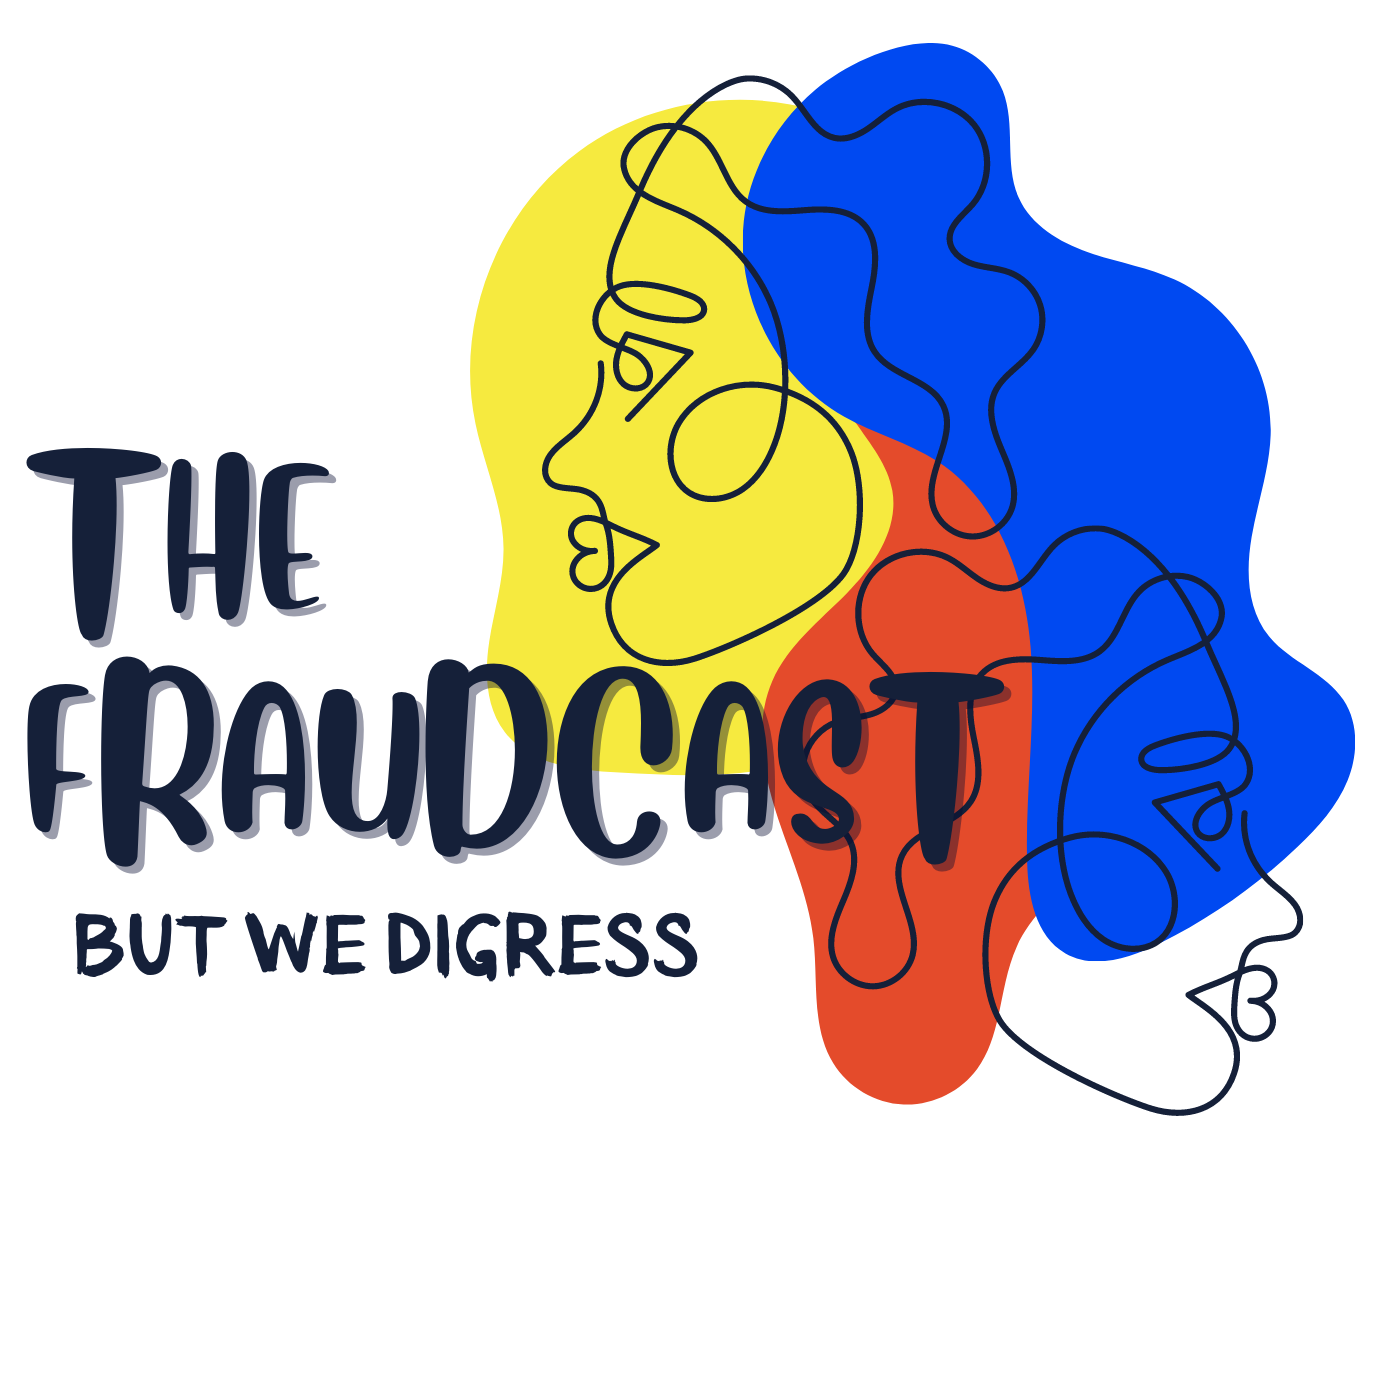 The Fraudcast: But We Digress Where Reality Gets Real